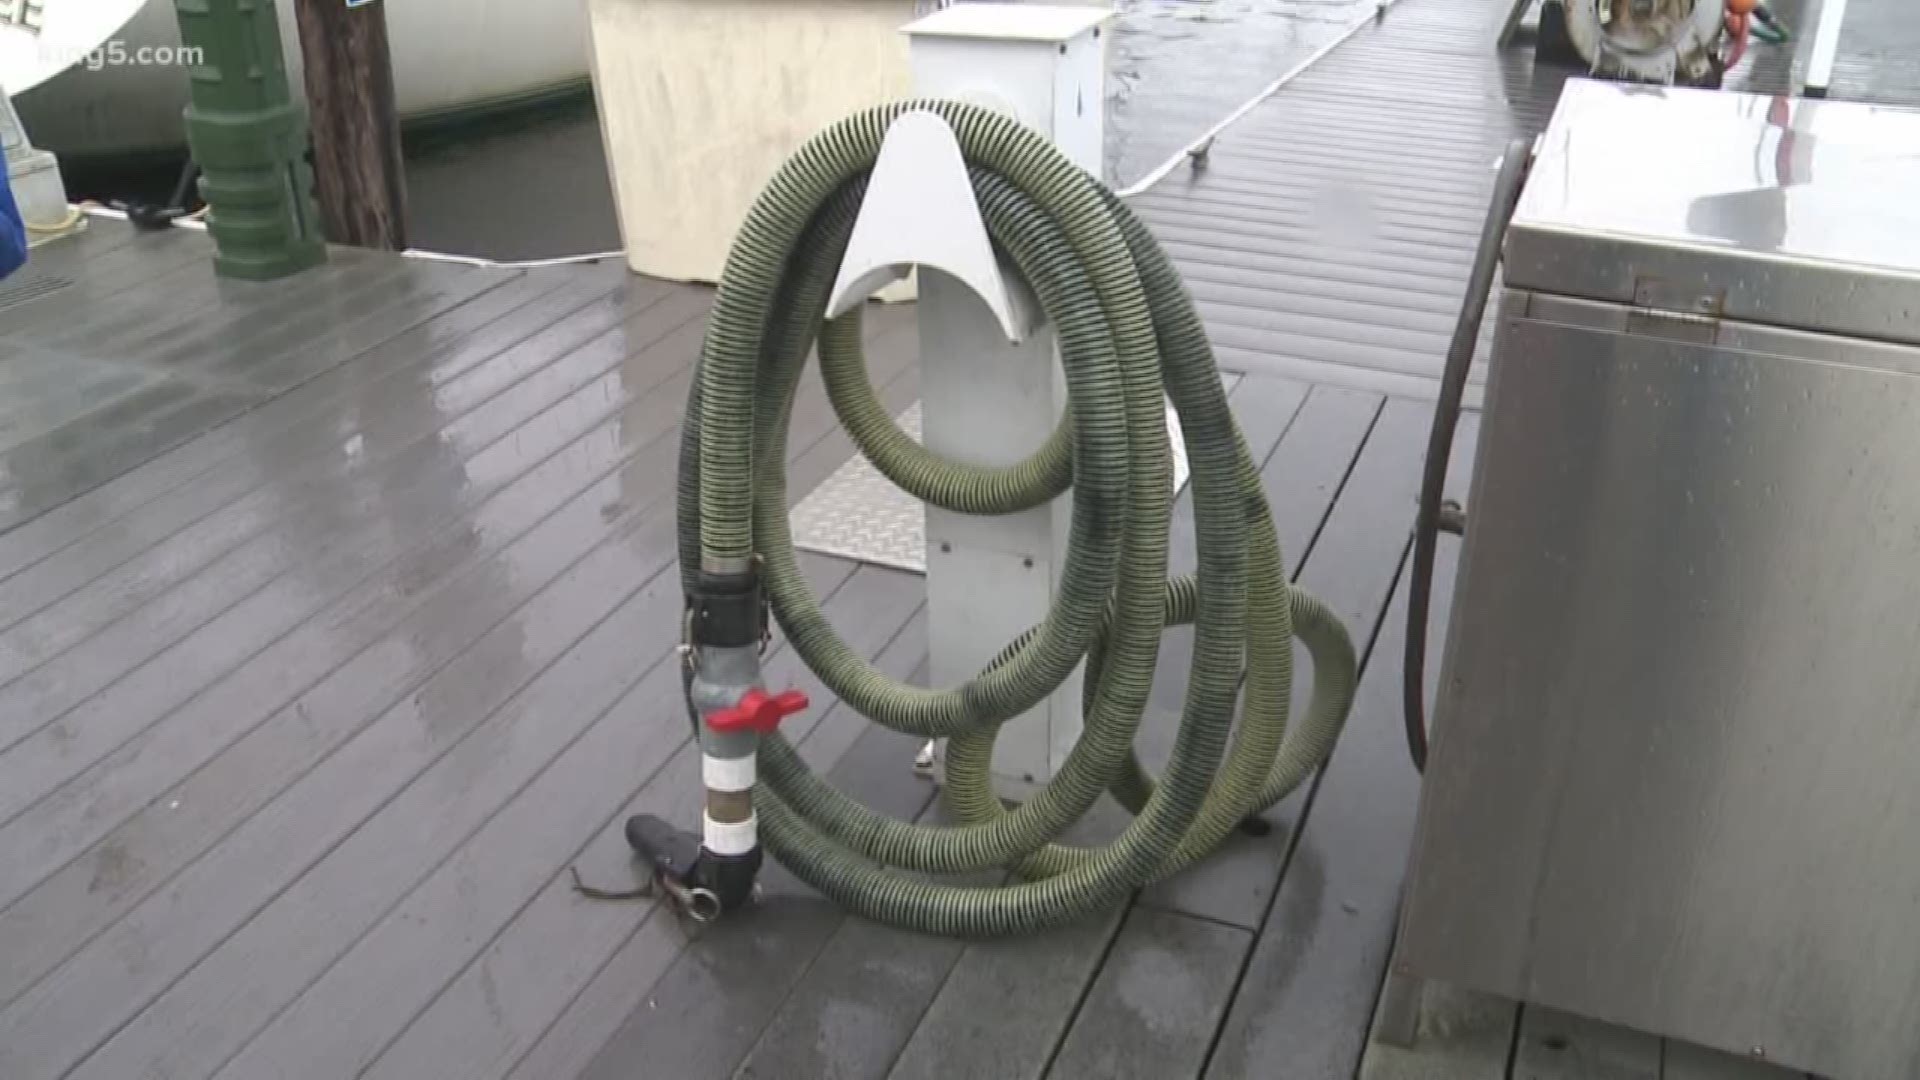 Tug boat companies are suing the EPA to stop a Washington state ruling that bans the dumping of raw sewage in Puget Sound area waterways. Now, several environmental activism groups are getting involved in the legal fight. KING 5's Alison Morrow reports